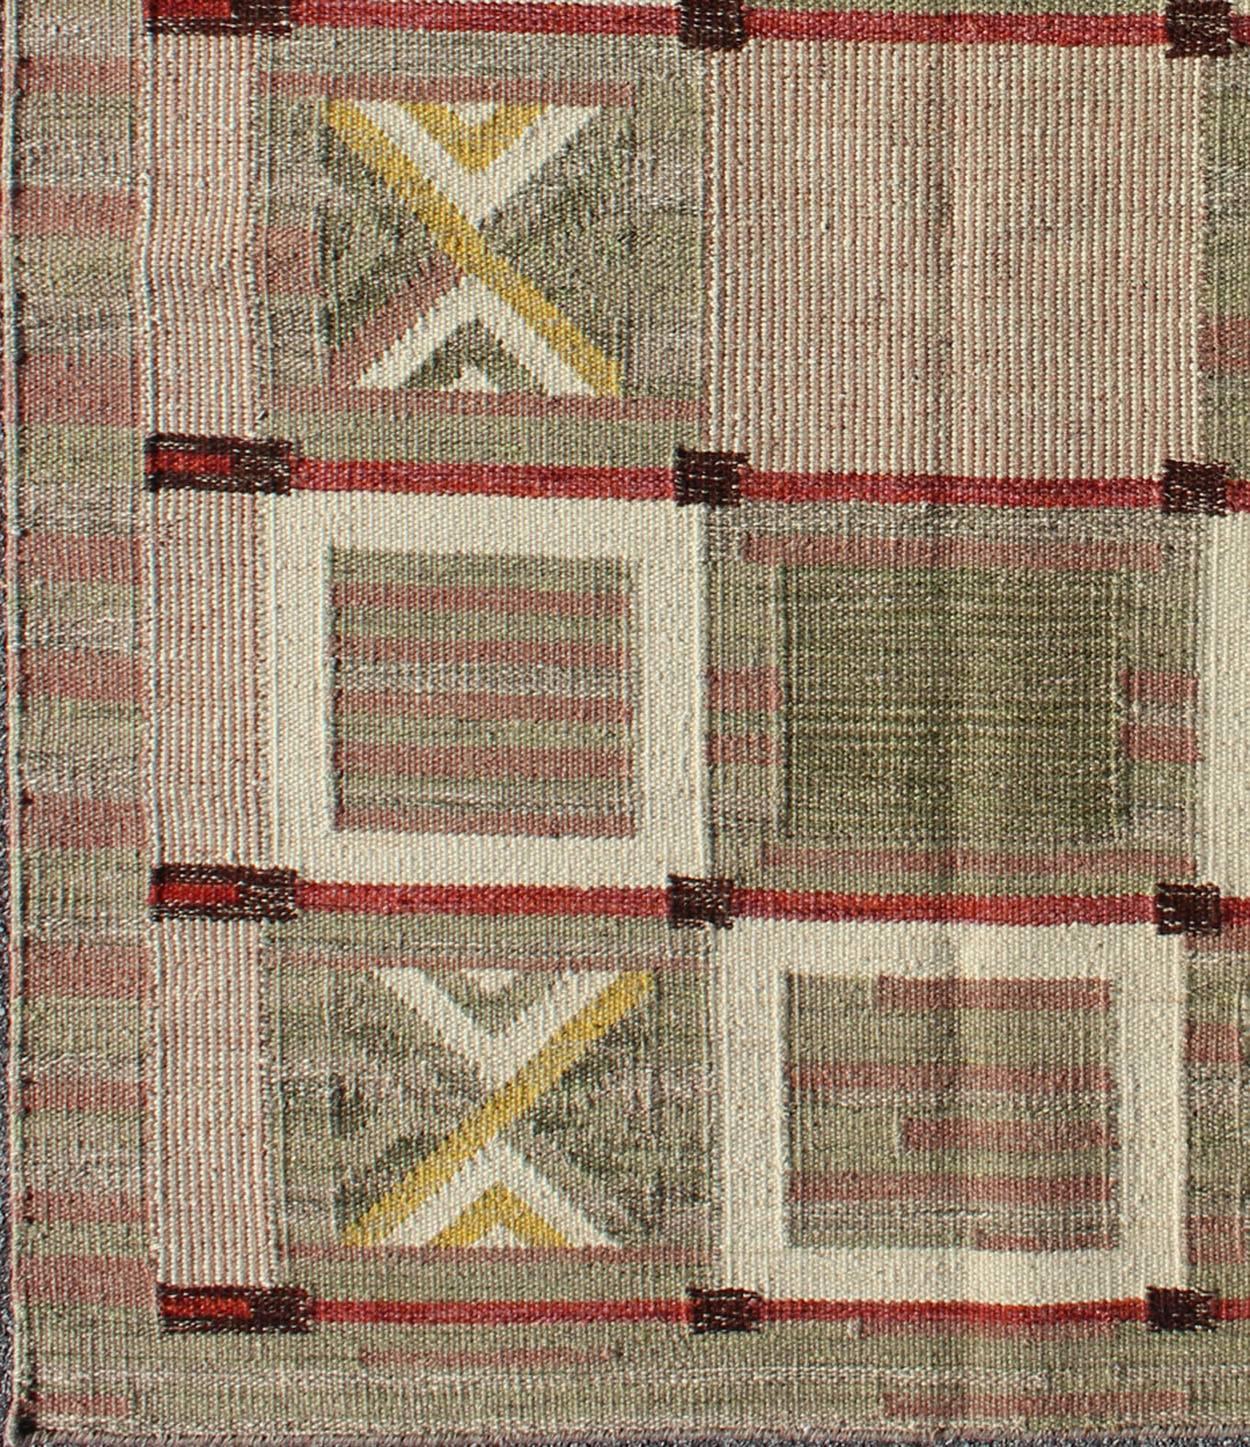 This Scandinavian flat-weave patterned rug is inspired by the work of Swedish textile designers of the early to mid-20th century. Featuring a unique blend of historical and modern design, rendered in shades of green, light mauve, red, brown and